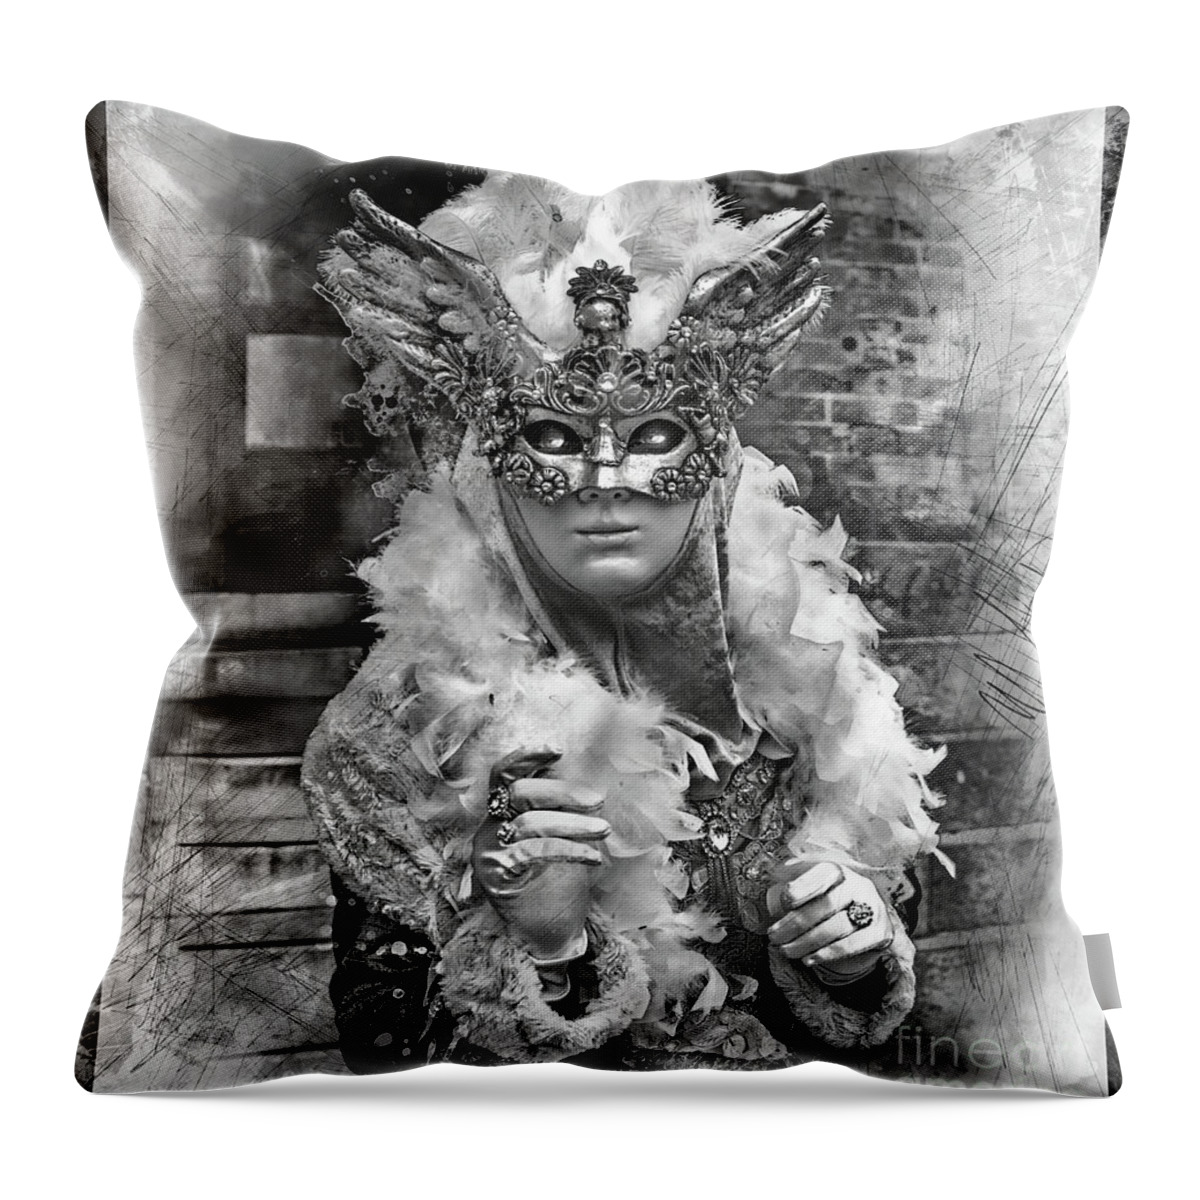 2017 Throw Pillow featuring the photograph In Grigio by Jack Torcello